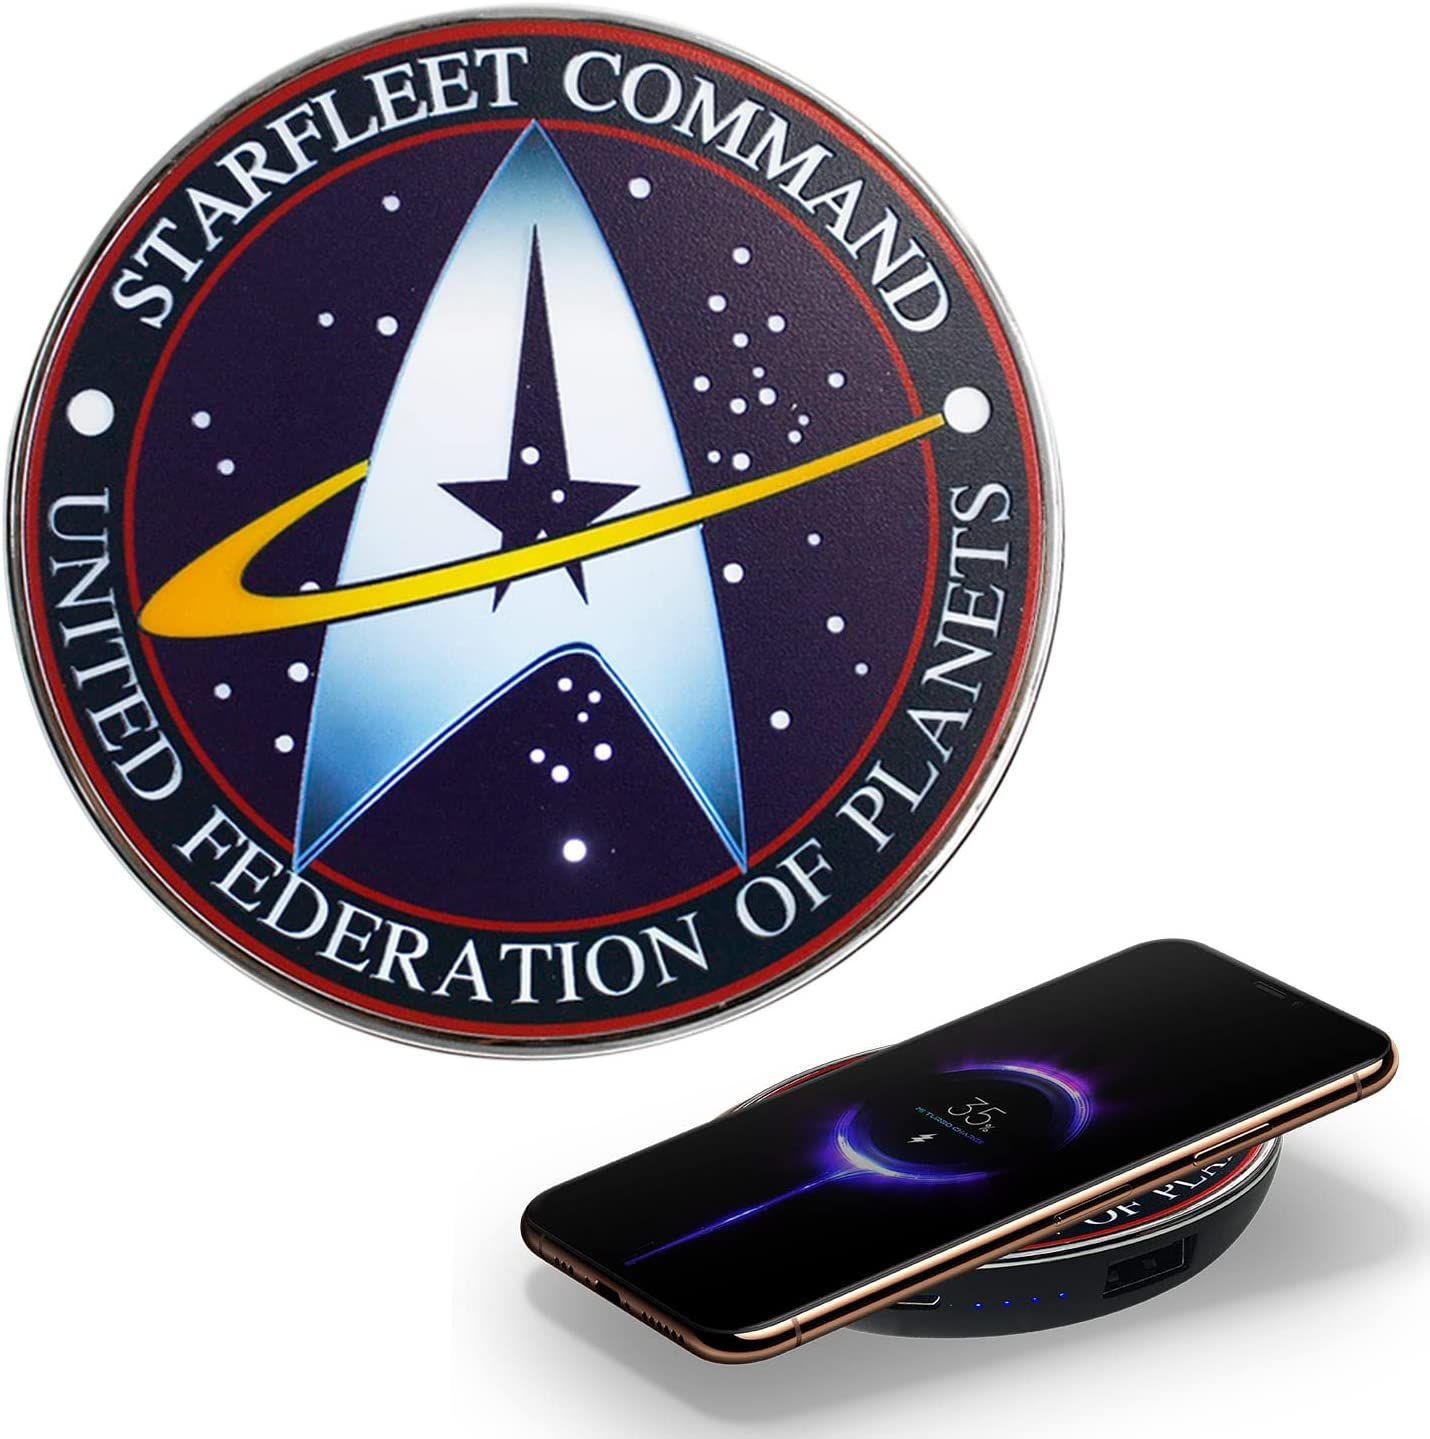 Star Trek Qi Wireless Charger is one of the best accessories for Star Trek Fans